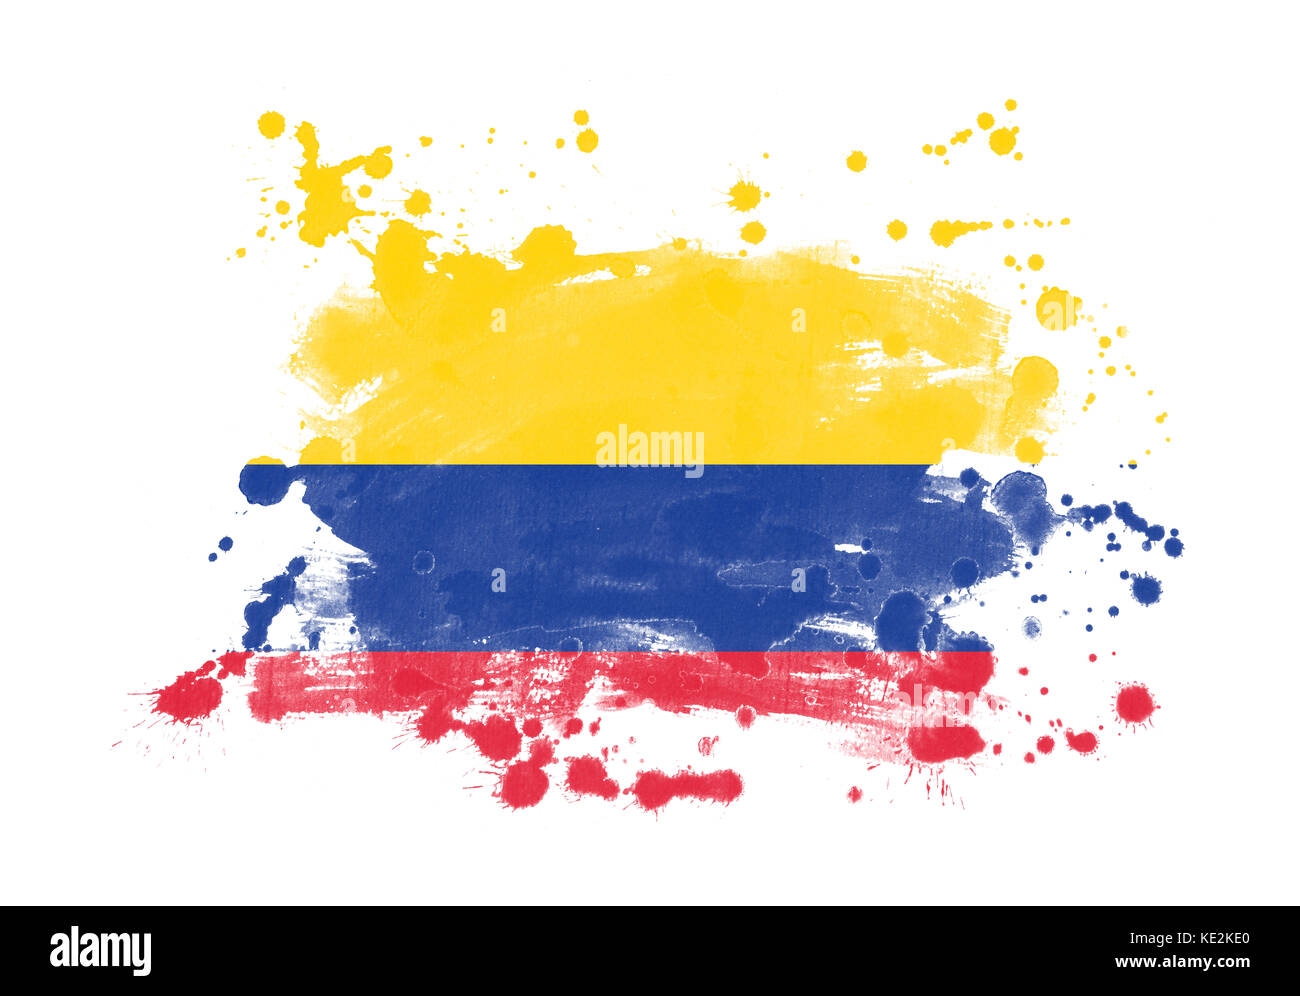 Colombia flag grunge painted background Stock Photo